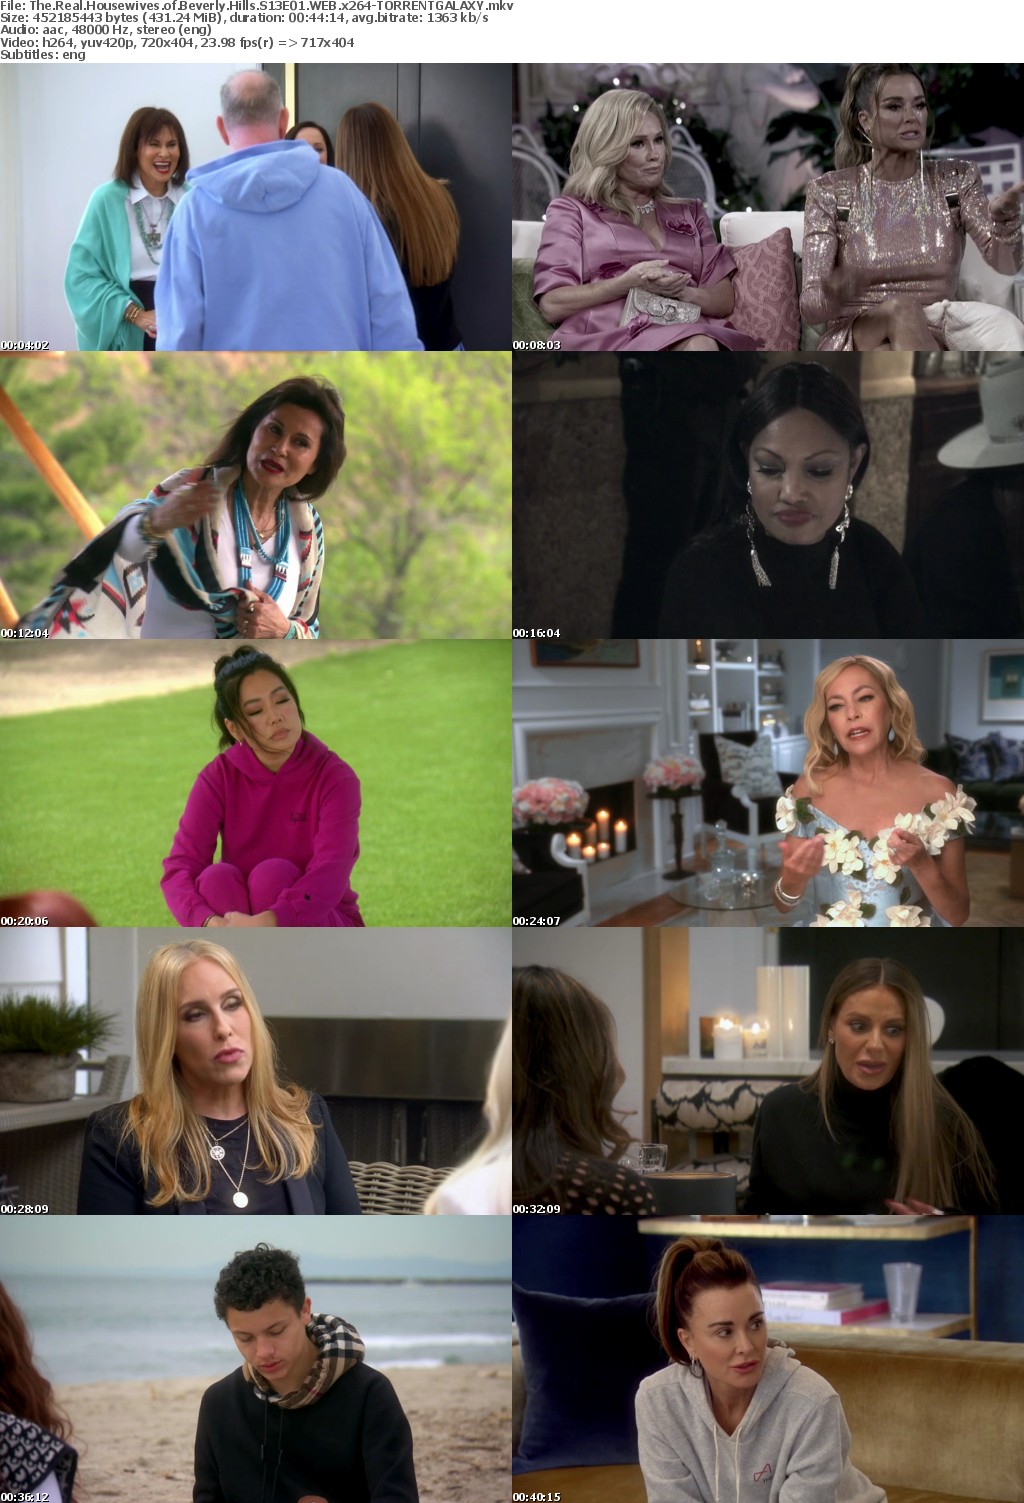 The Real Housewives of Beverly Hills S13E01 WEB x264-GALAXY